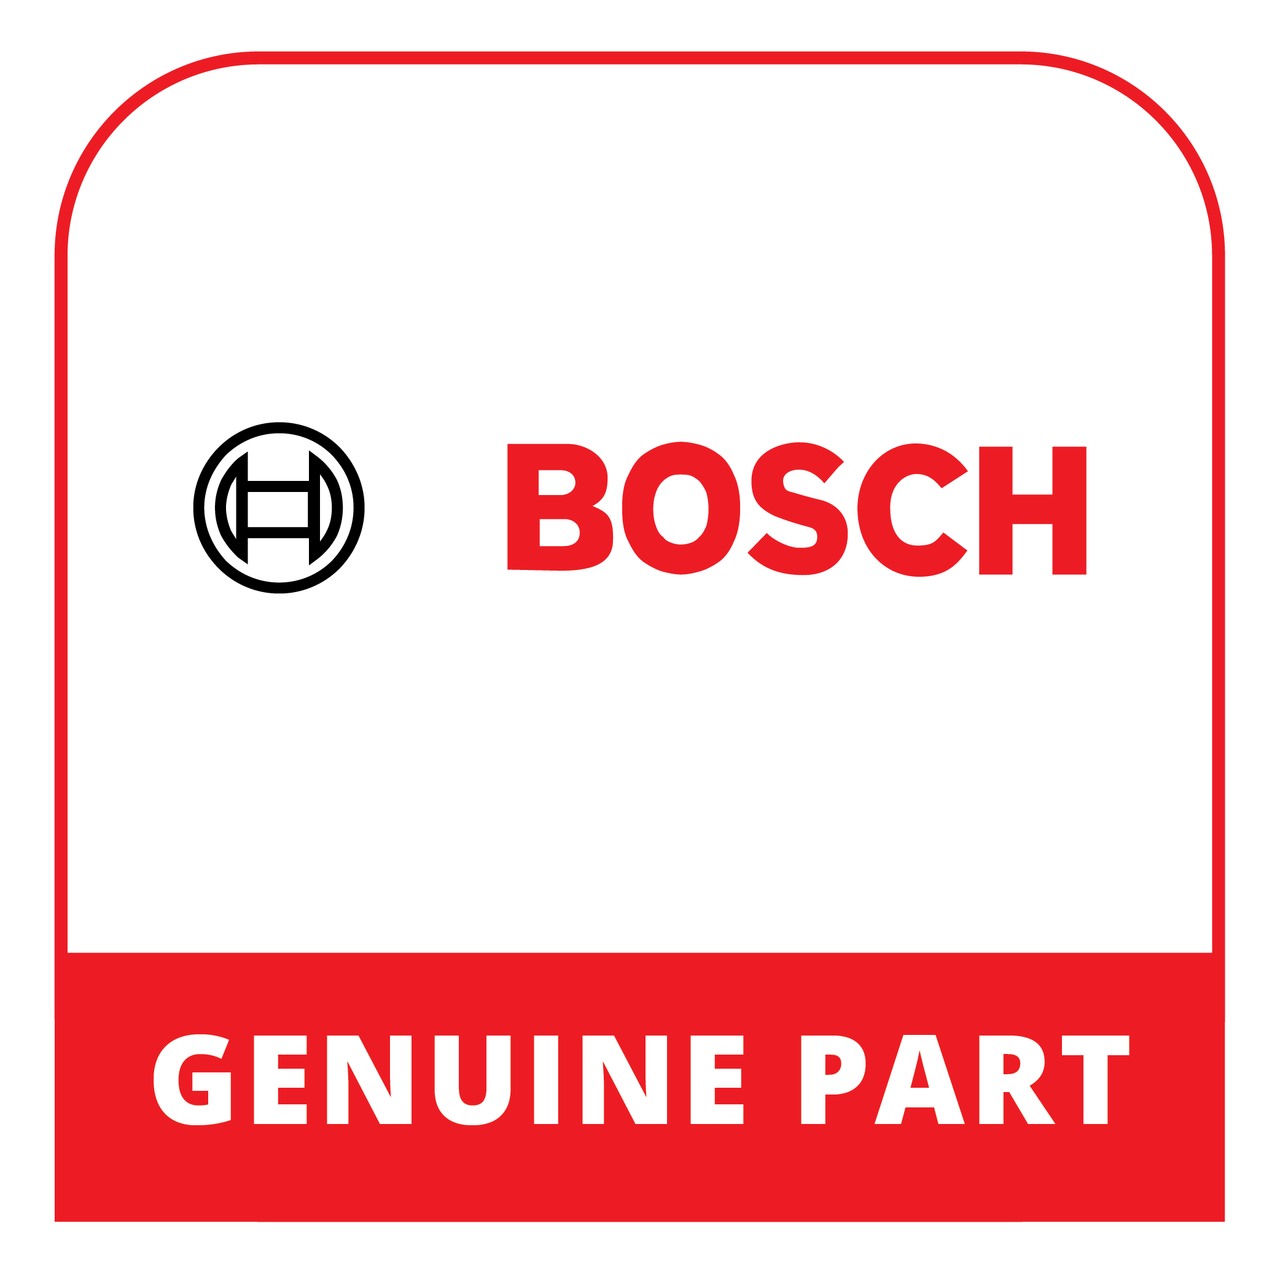 Bosch (Thermador) 11052878 - Gas Tap - Genuine Bosch (Thermador) Part